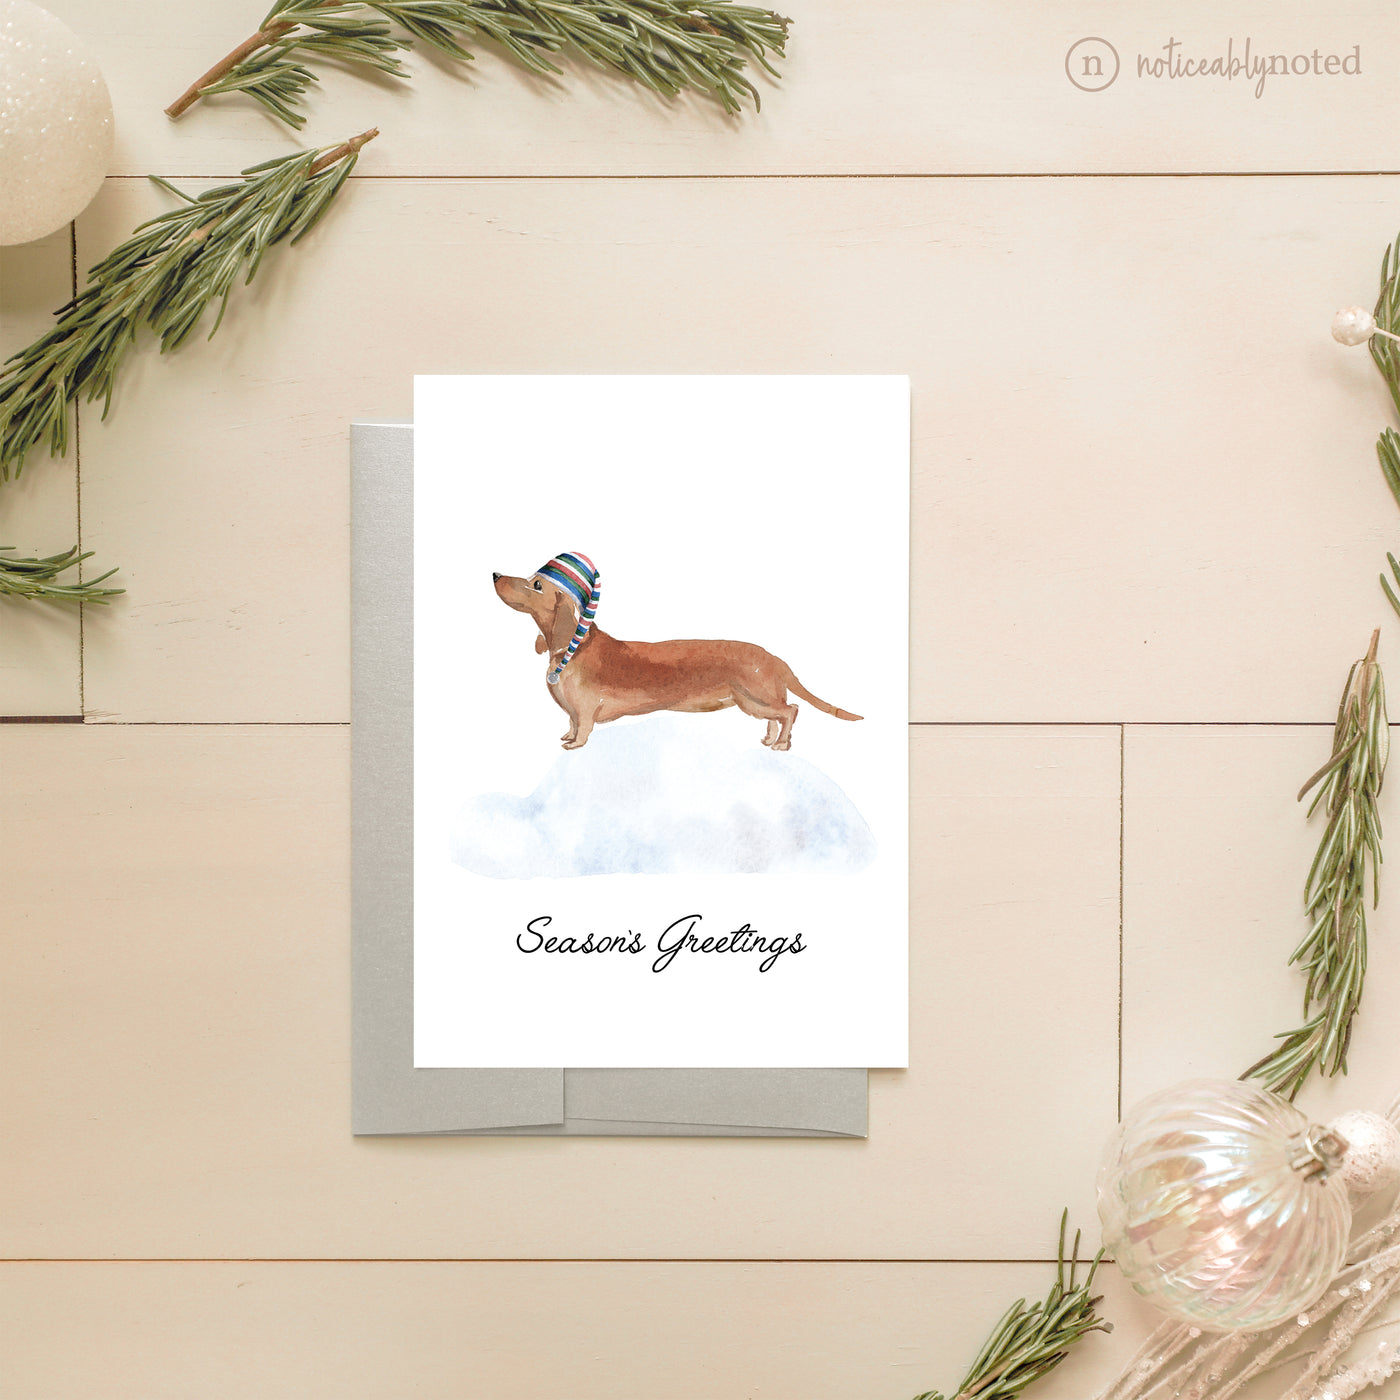 Dachshund Dog Holiday Greeting Cards | Noticeably Noted